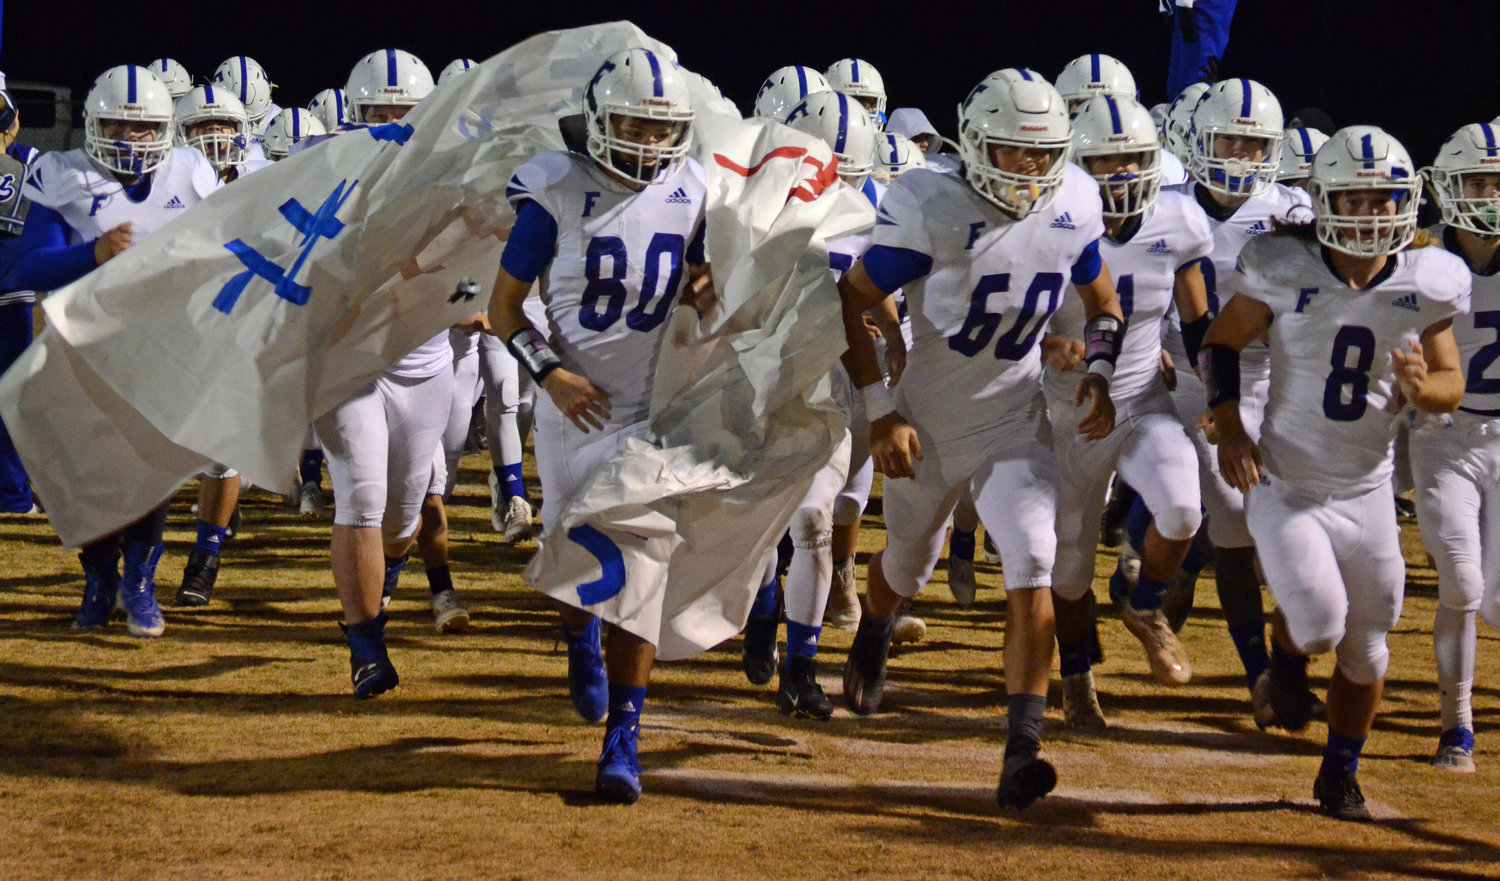 The Rockets run out before their Class 2A second round playoff game at Waverly Friday night.